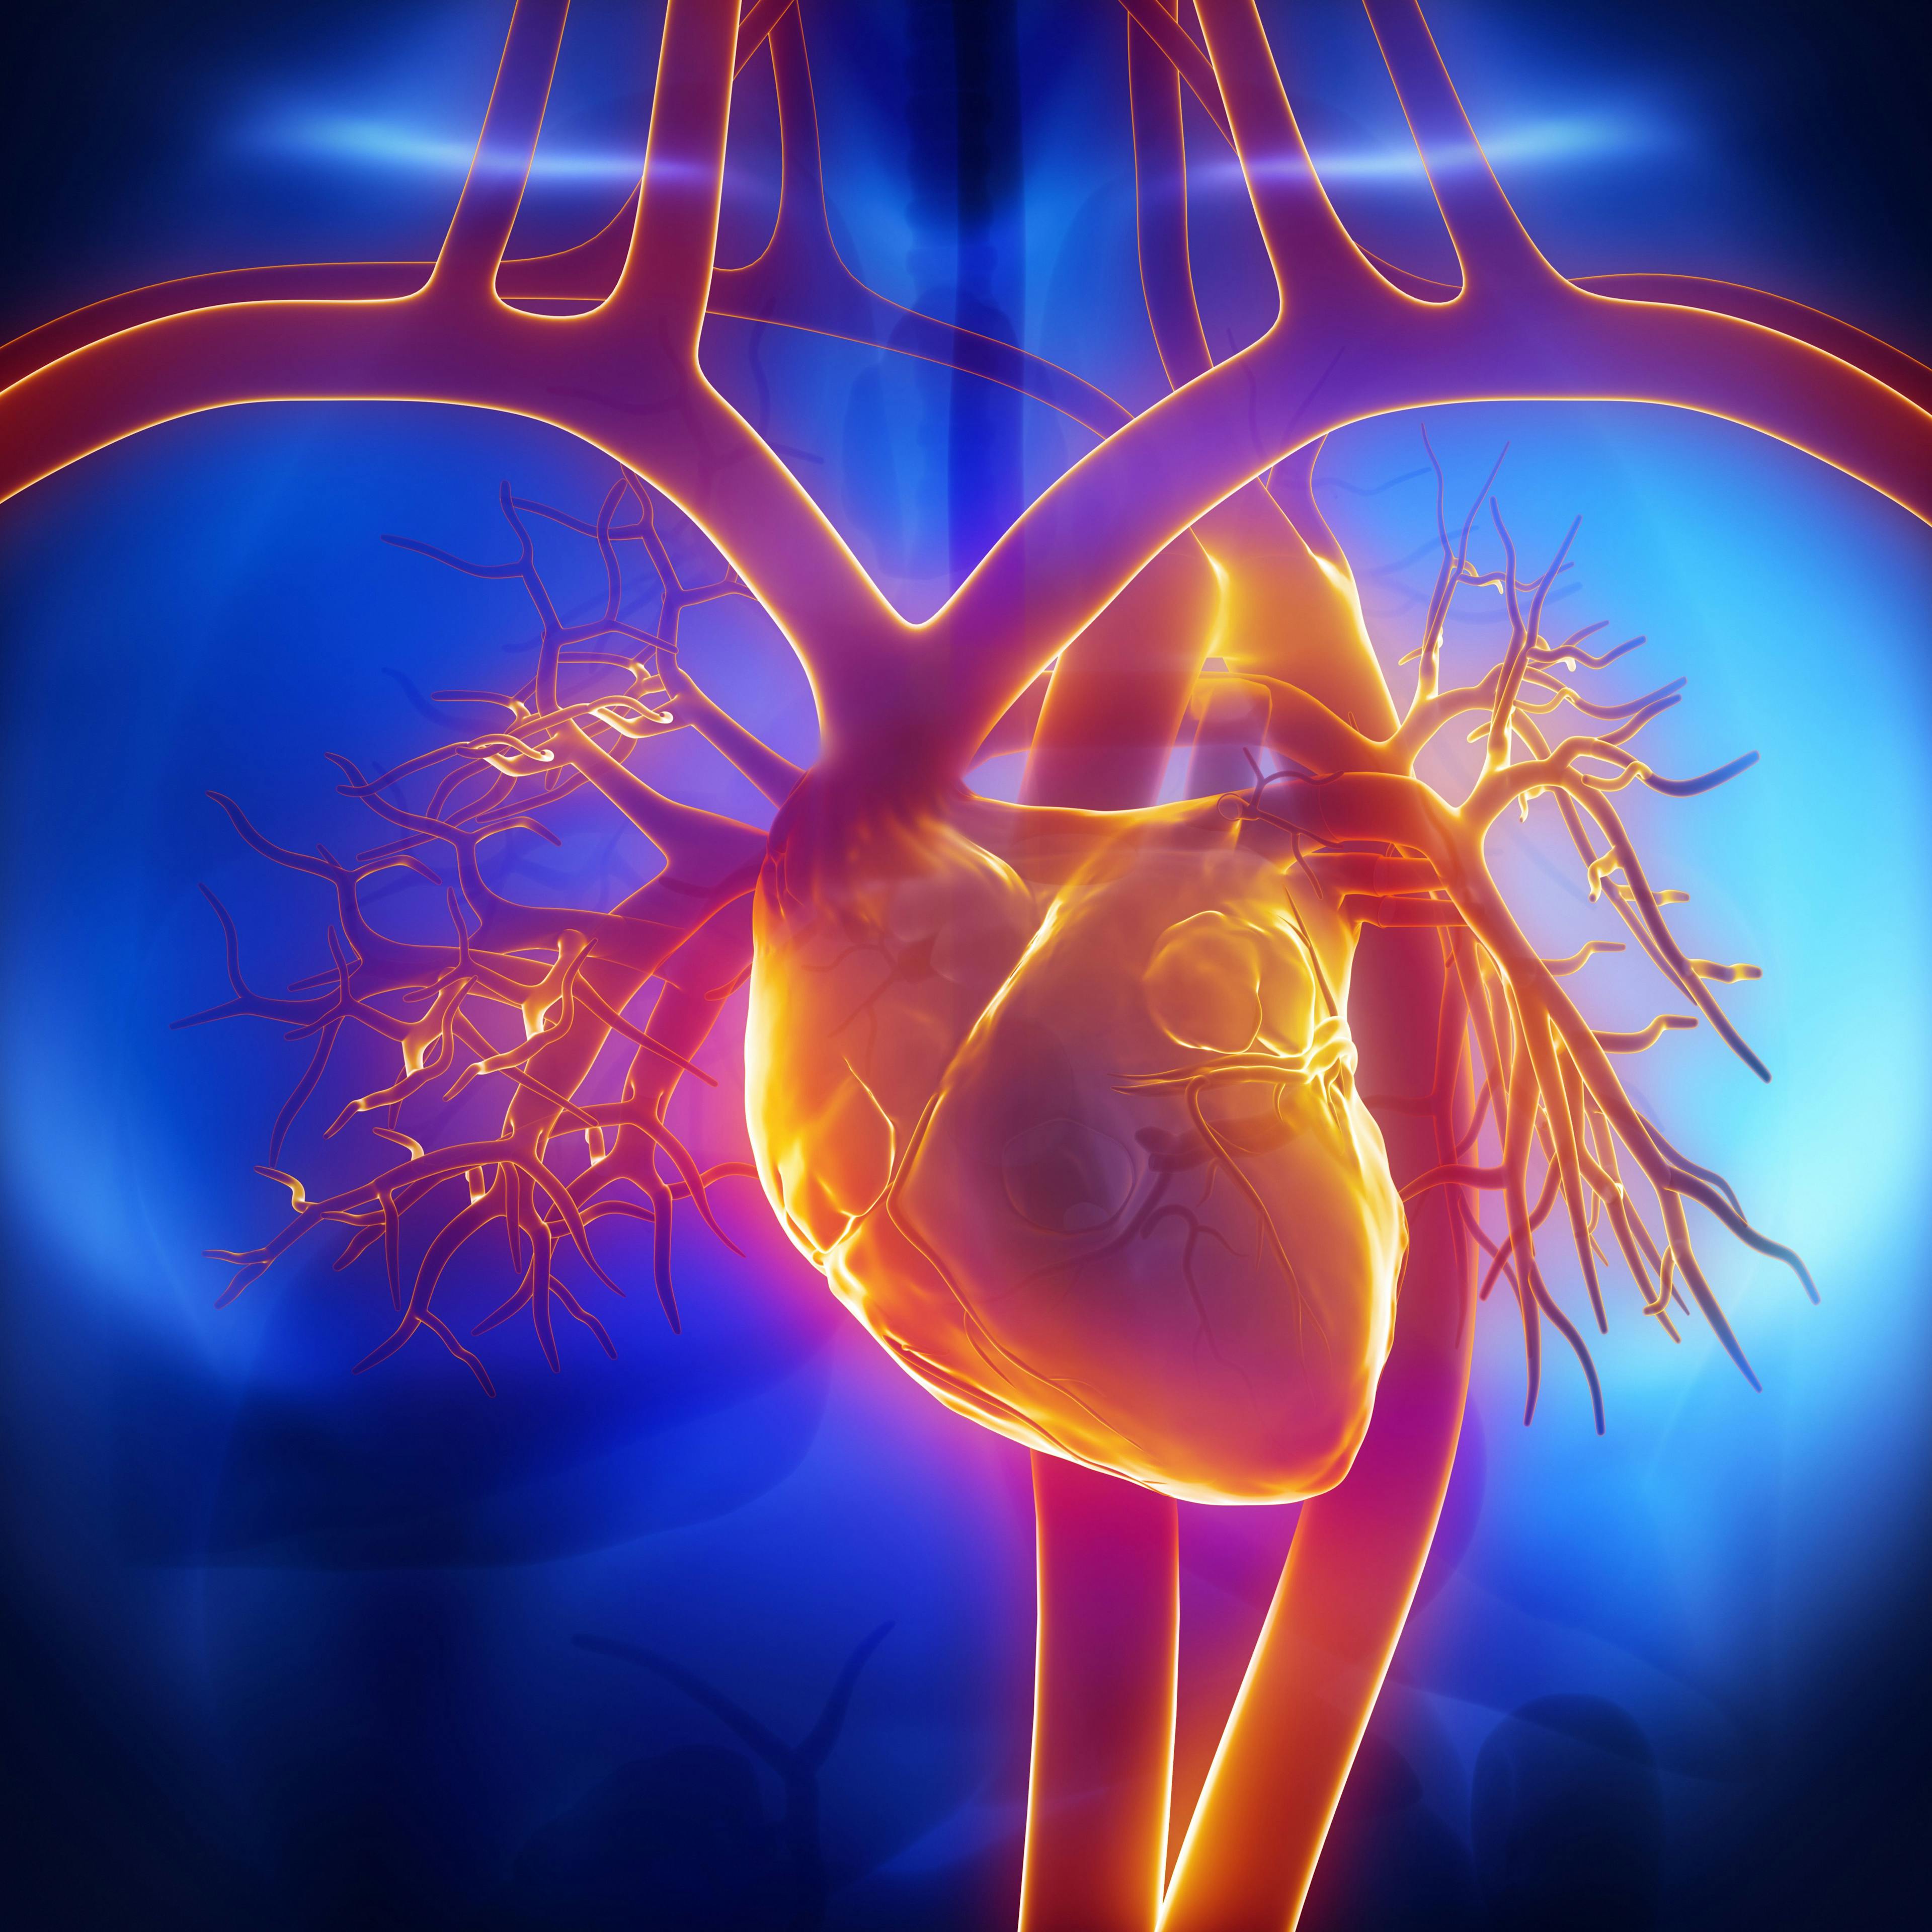 Heart Defects Linked to Higher Risk of Severe COVID-19 Illness, Study Results Show